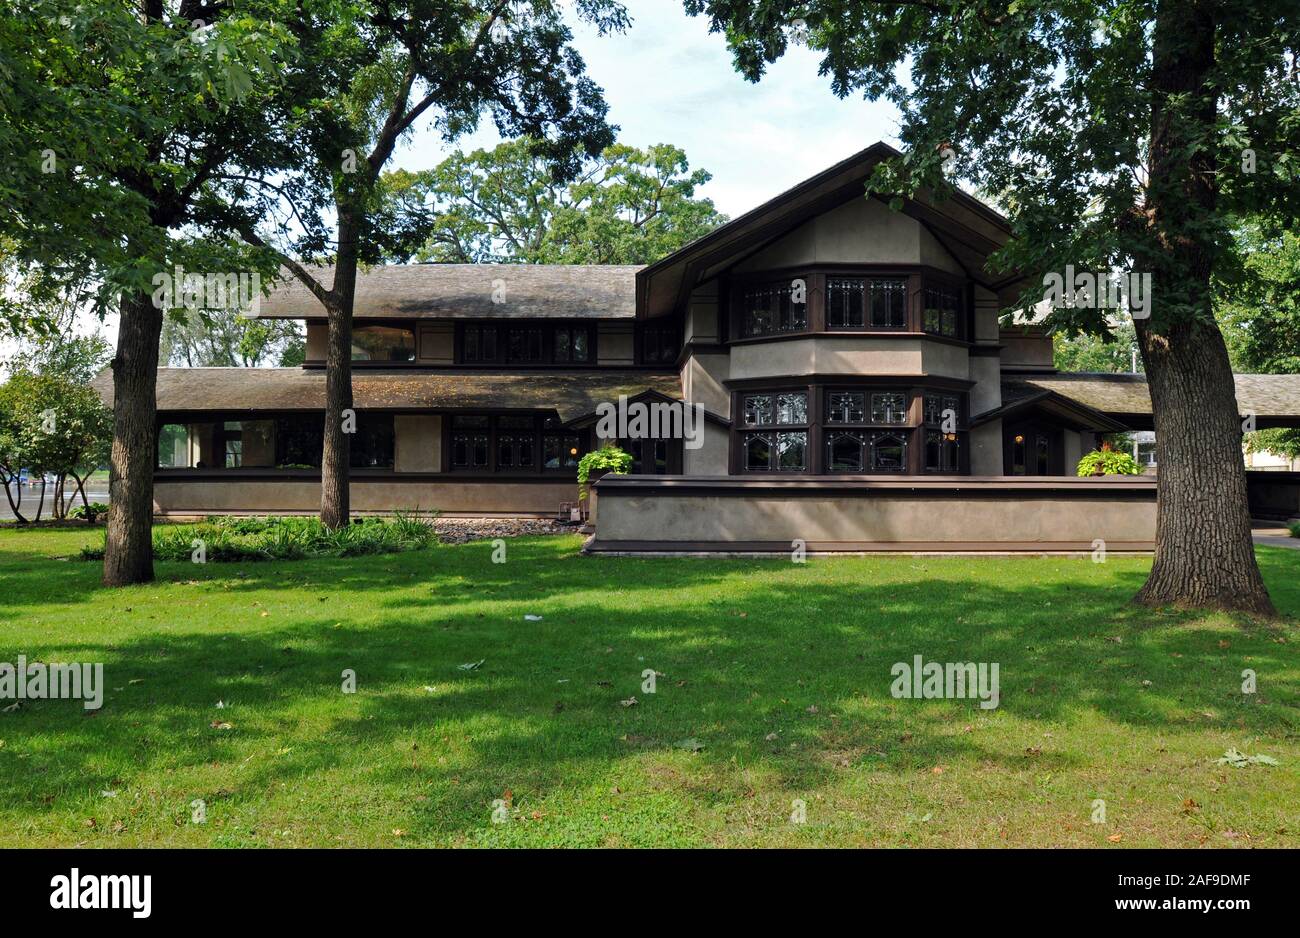 The  B. Harley Bradley House, designed by Frank Lloyd Wright in the Prairie style and constructed in Kankakee, Illinois in 1900. It is open for tours. Stock Photo